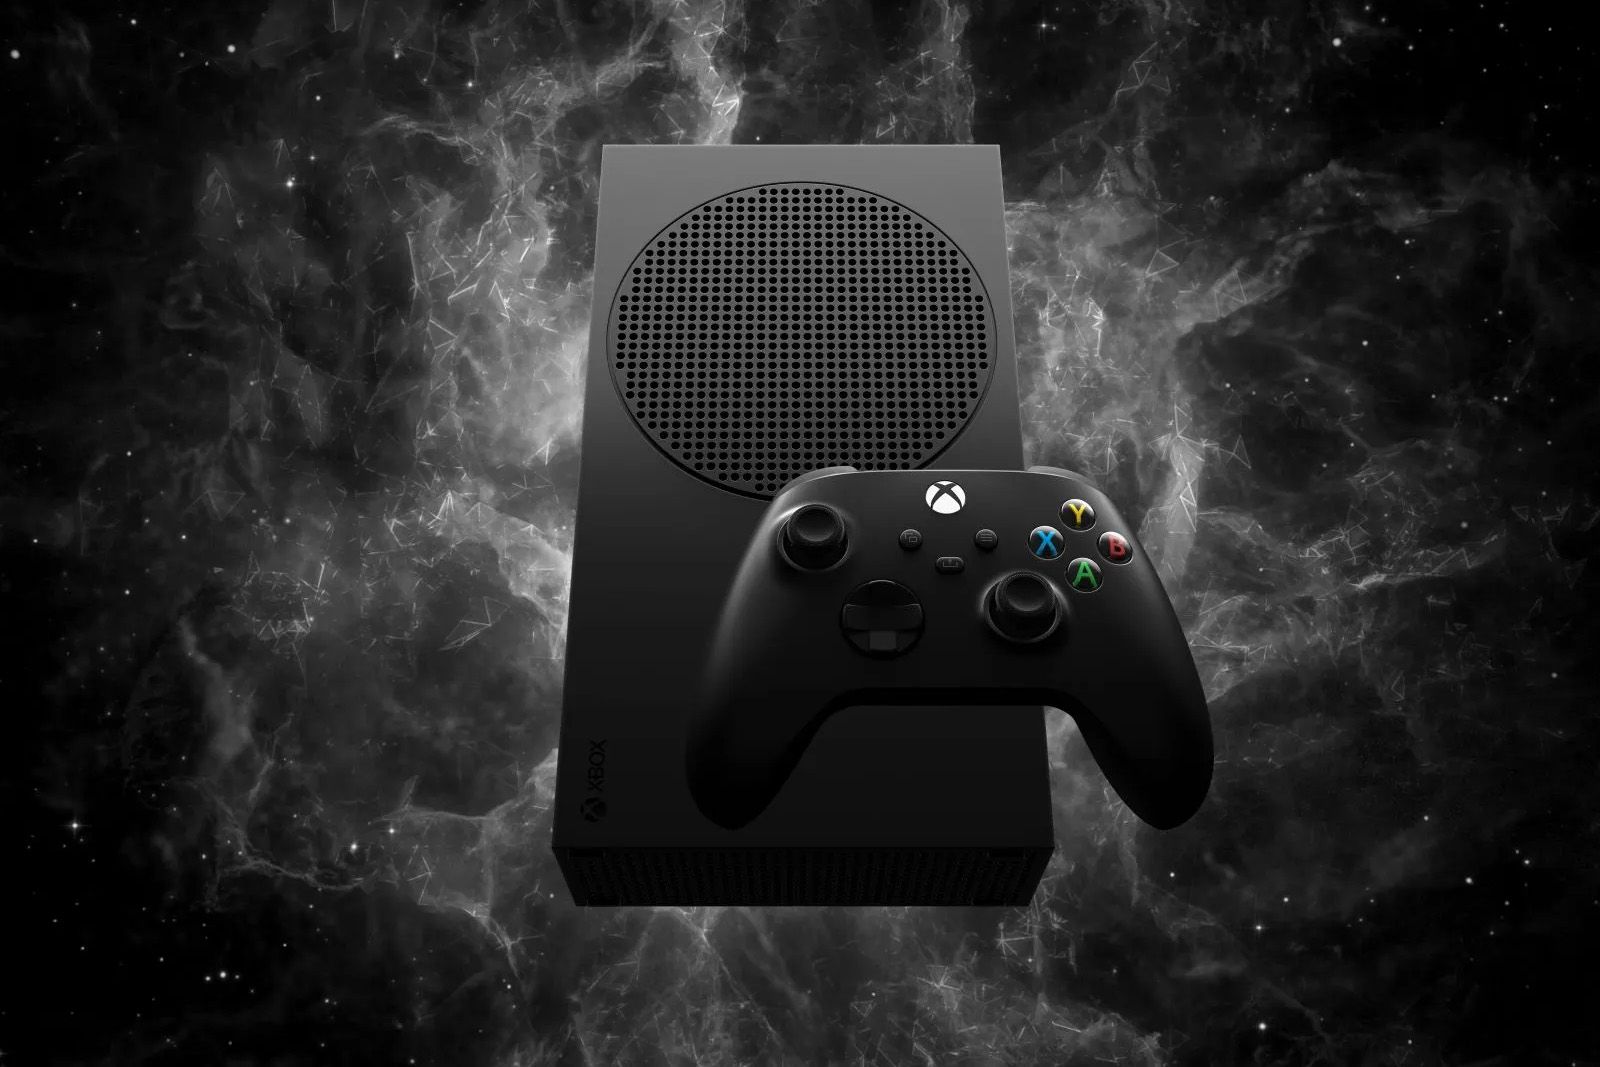 The Xbox Series S gets more storage and Carbon Black styling